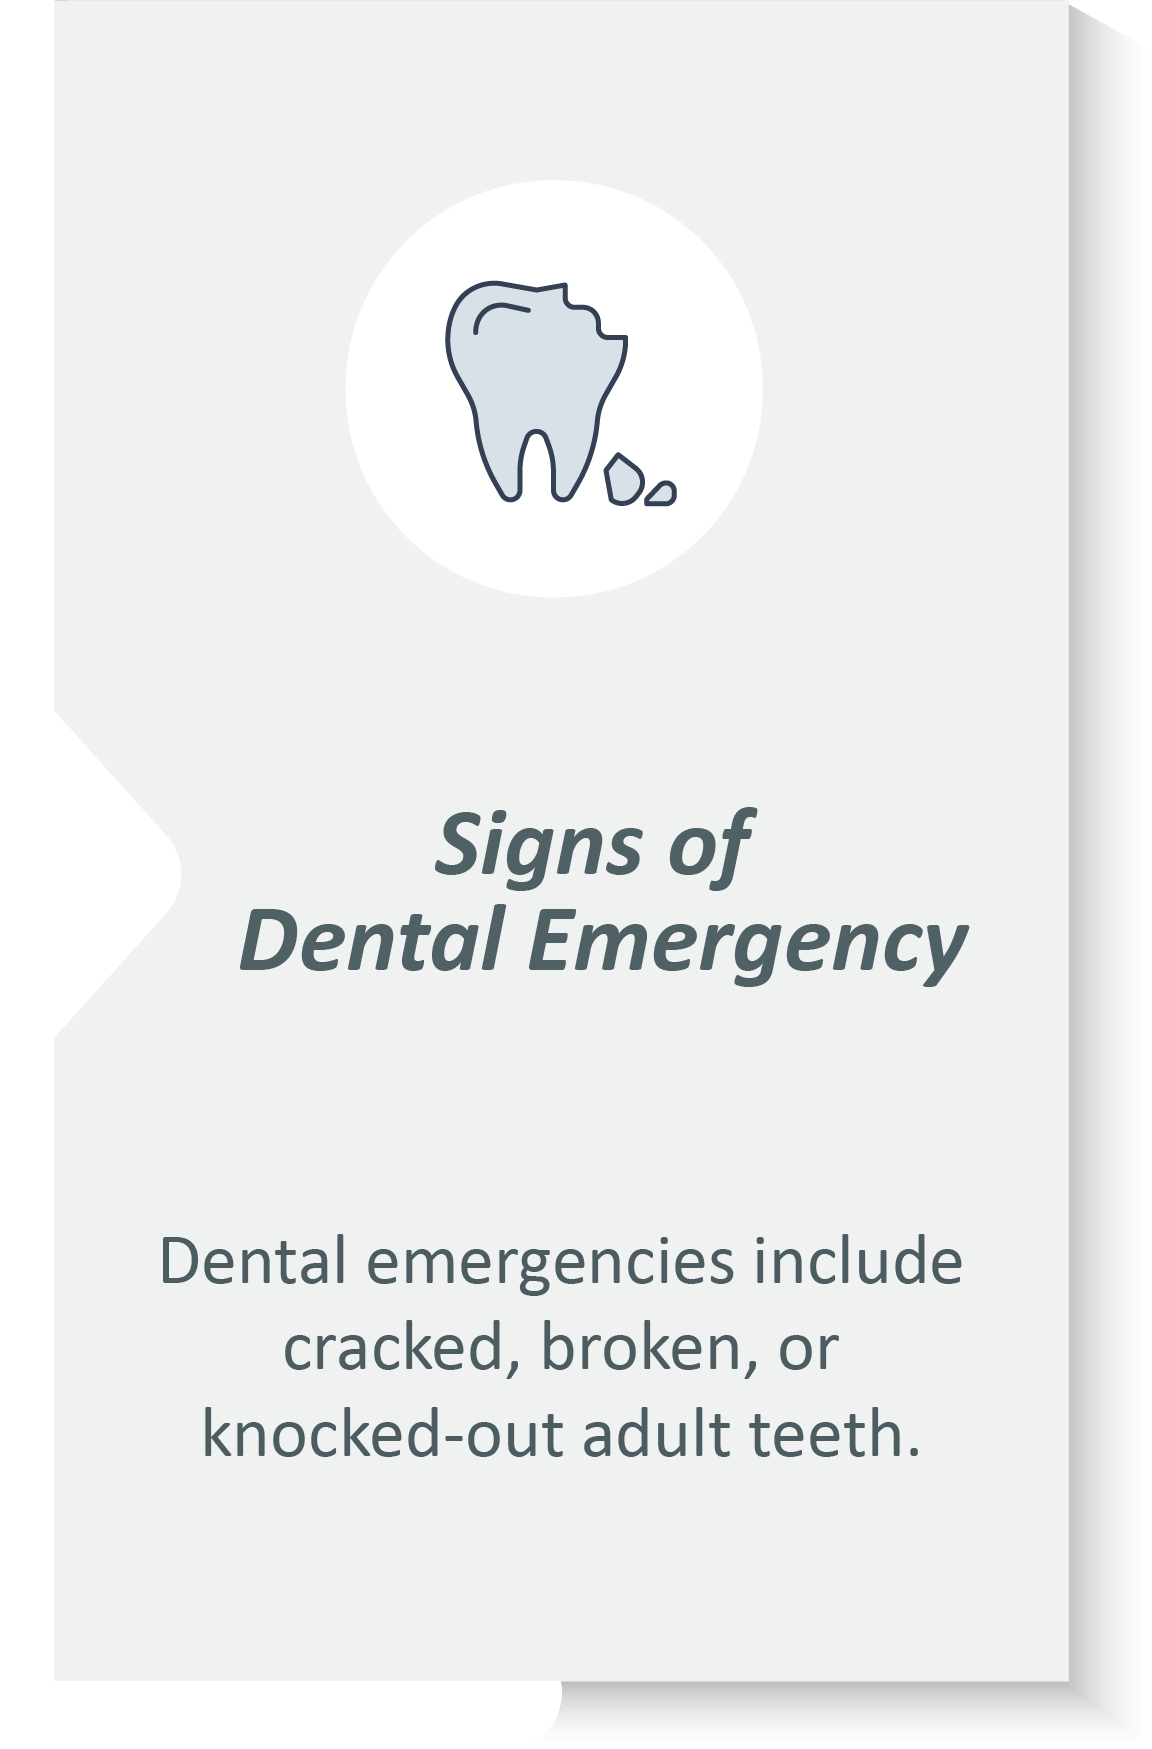 Emergency dentist infographic: Dental emergencies include cracked, broken, or knocked-out adult teeth.